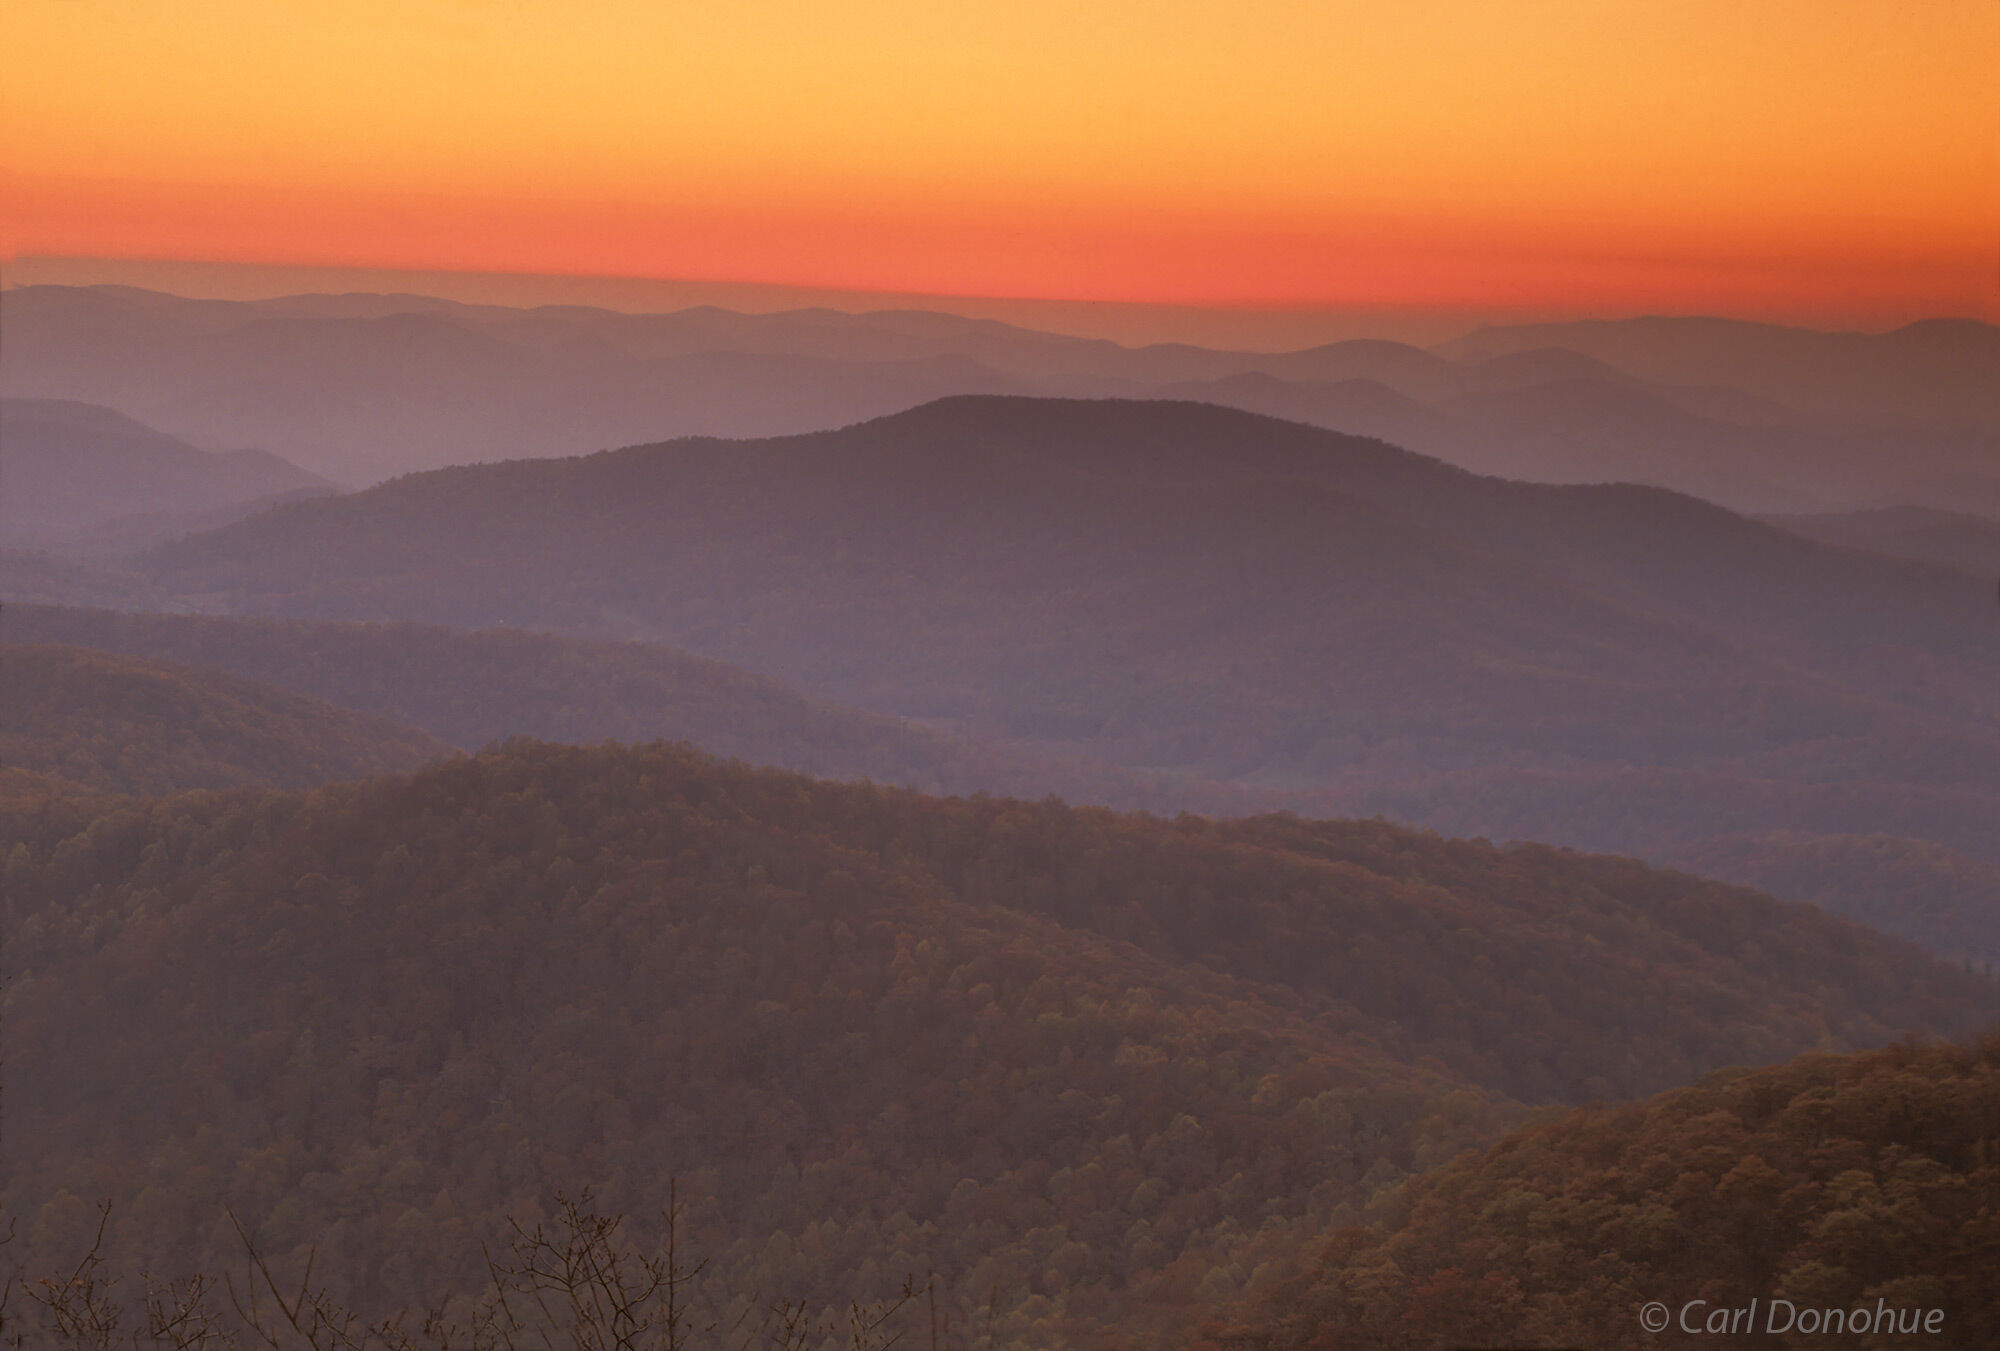 Sunset over the southern Appalachian mountains from Blood Mountain, near Neil's Gap. This is the Blood Mountain Wilderness, along...